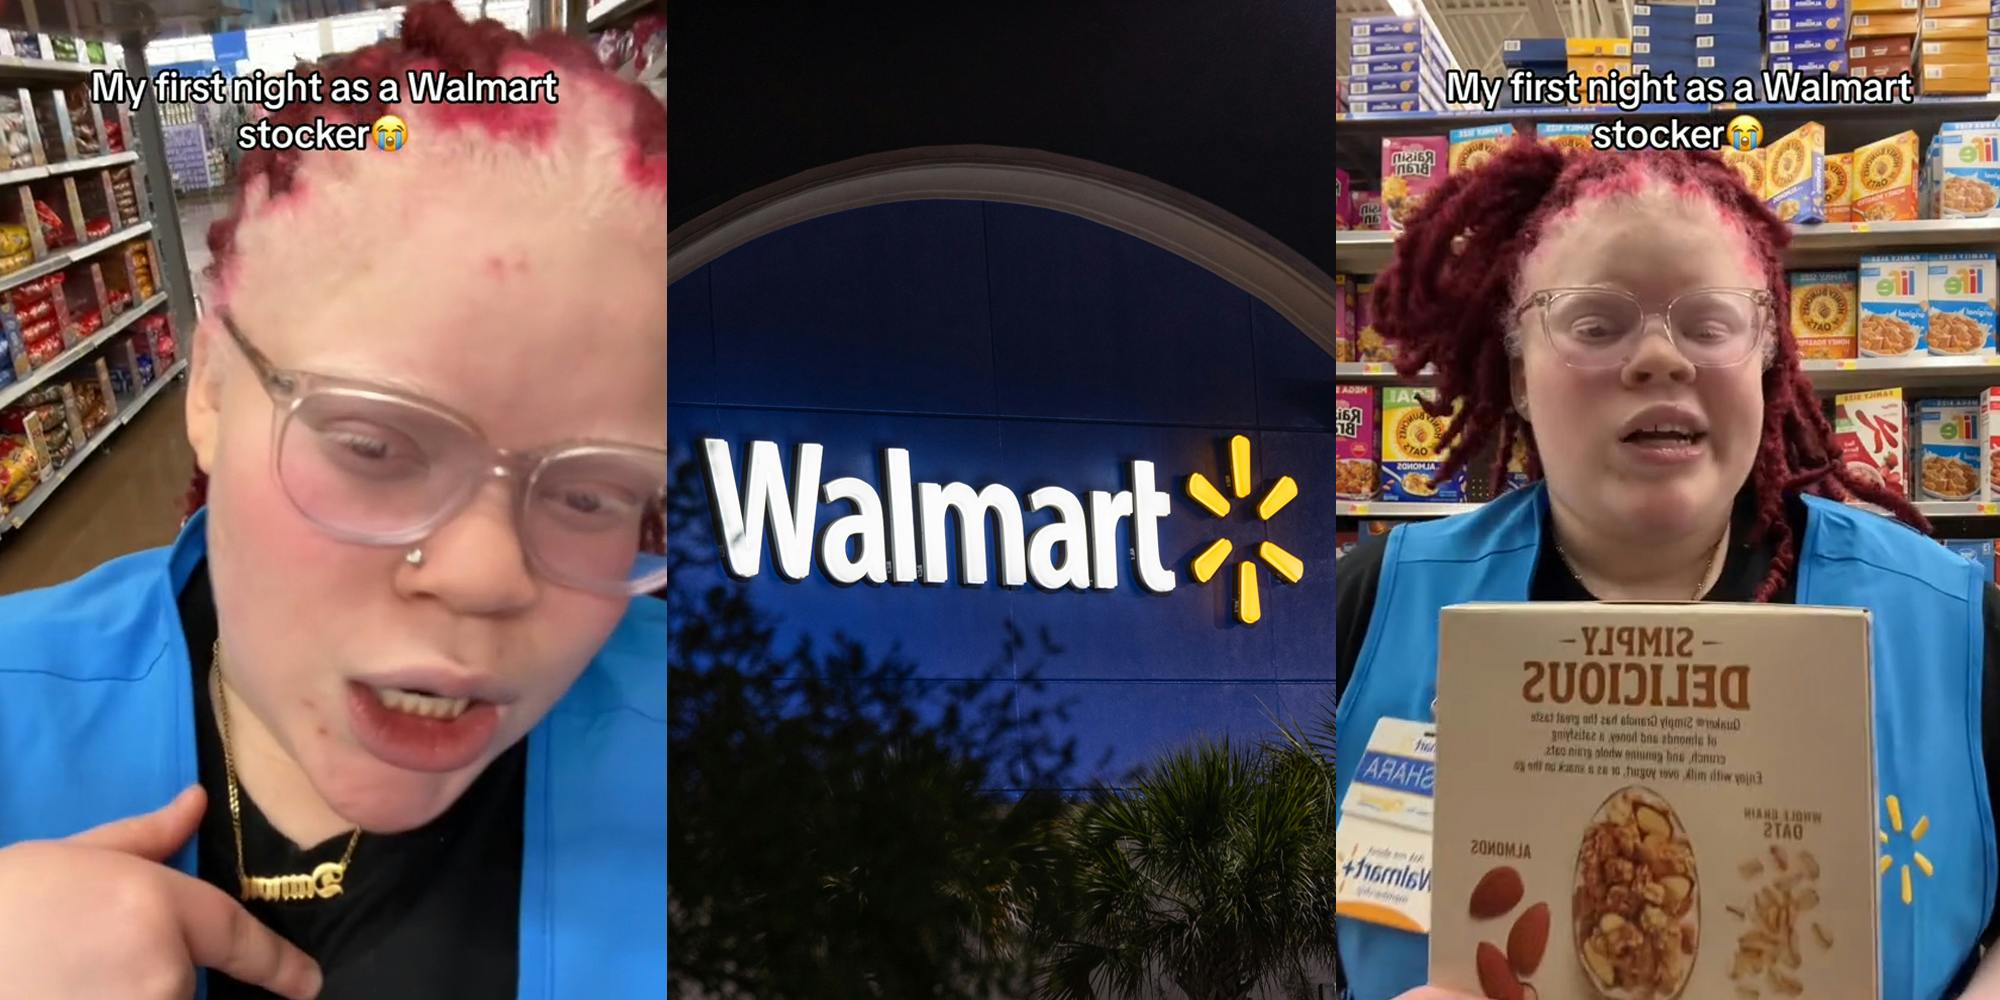 Walmart employee speaking with caption "My first night as a Walmart stocker" (l) Walmart sign at night (c) Walmart employee speaking with caption "My first night as a Walmart stocker" (r)